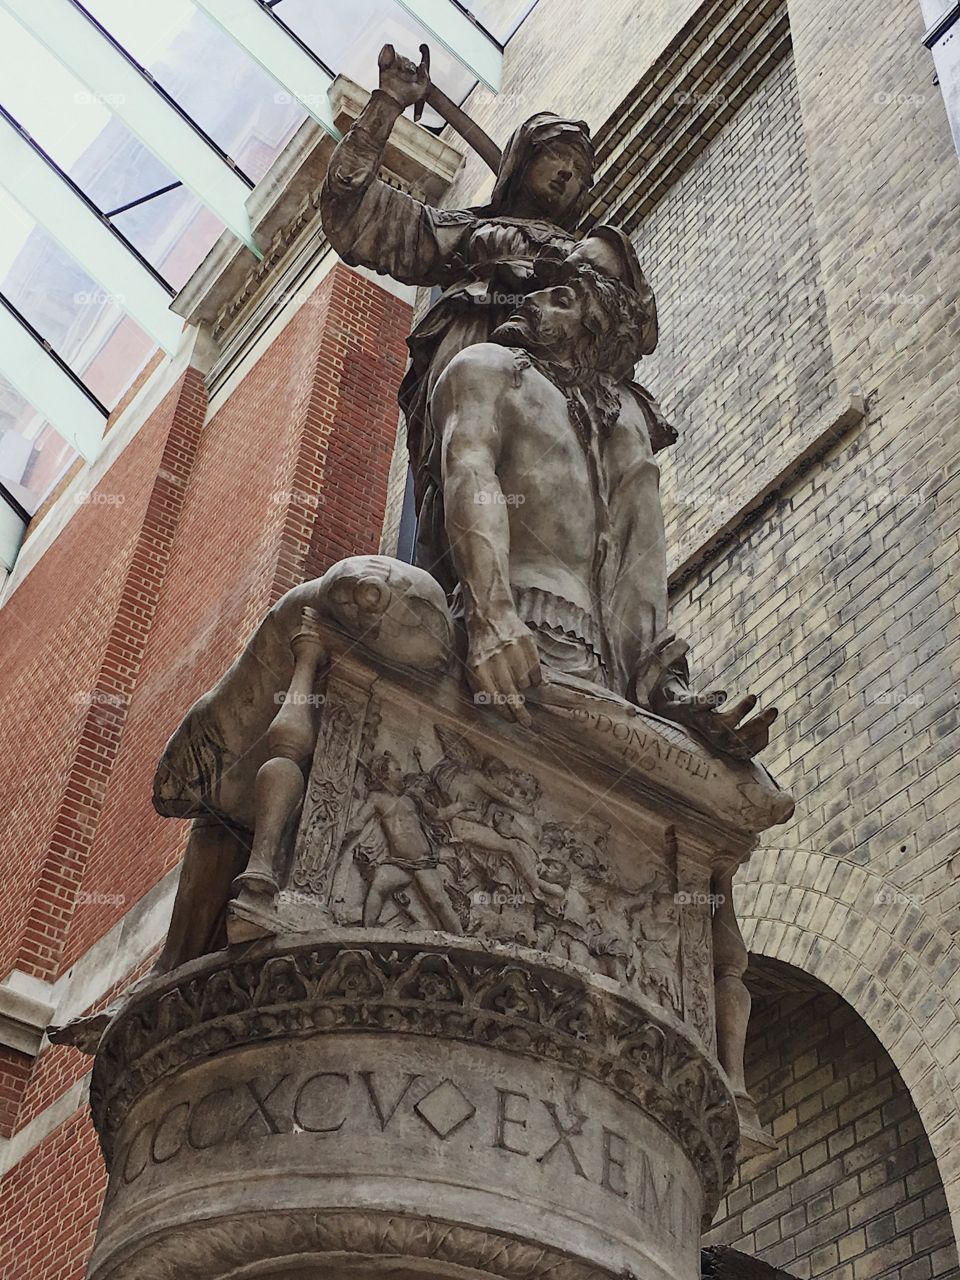 A statue in the Victoria and Albert museum, looking up at the woman, holding the sword.